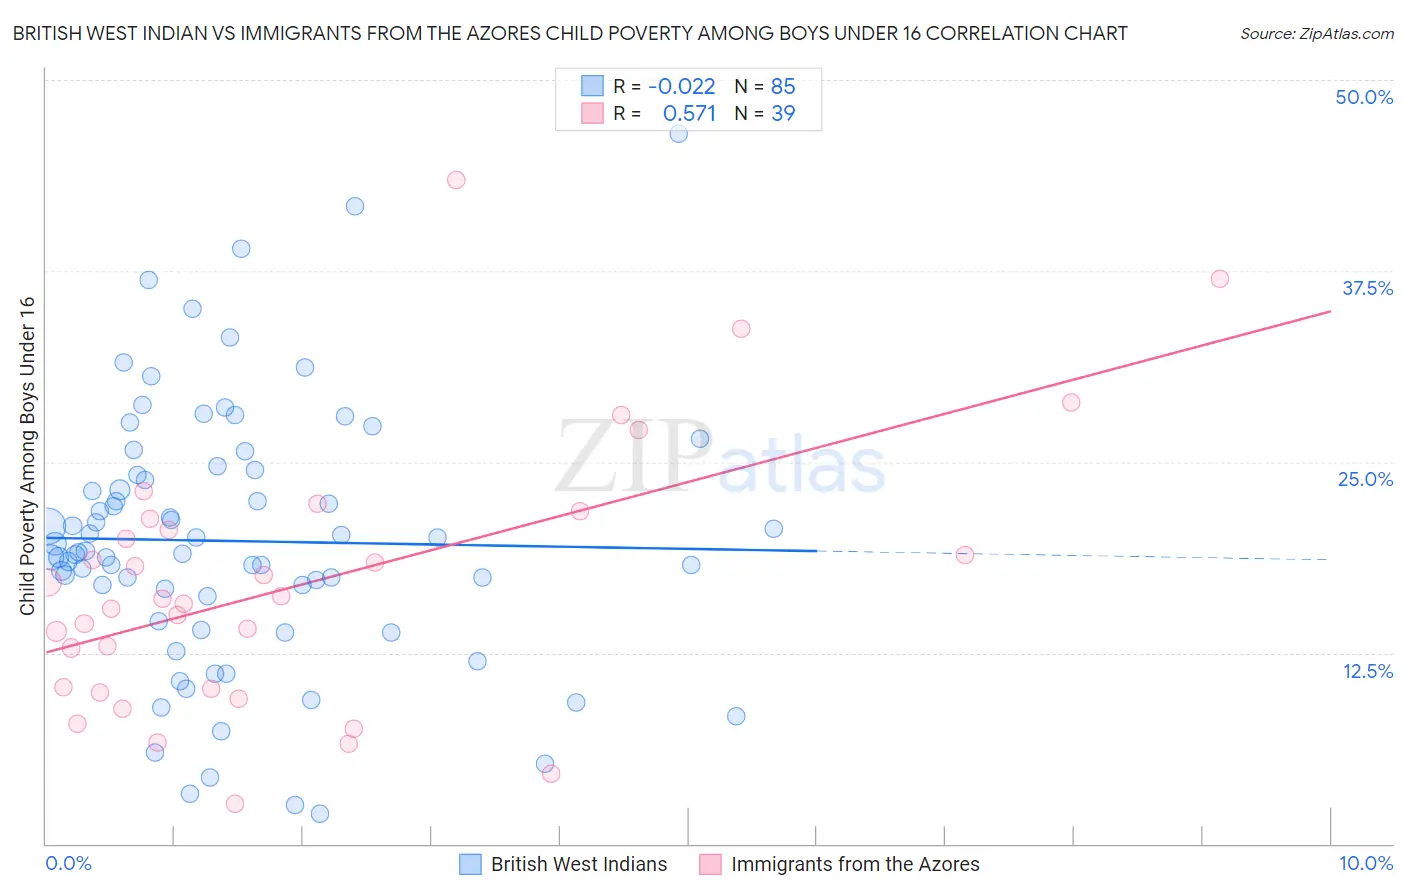 British West Indian vs Immigrants from the Azores Child Poverty Among Boys Under 16